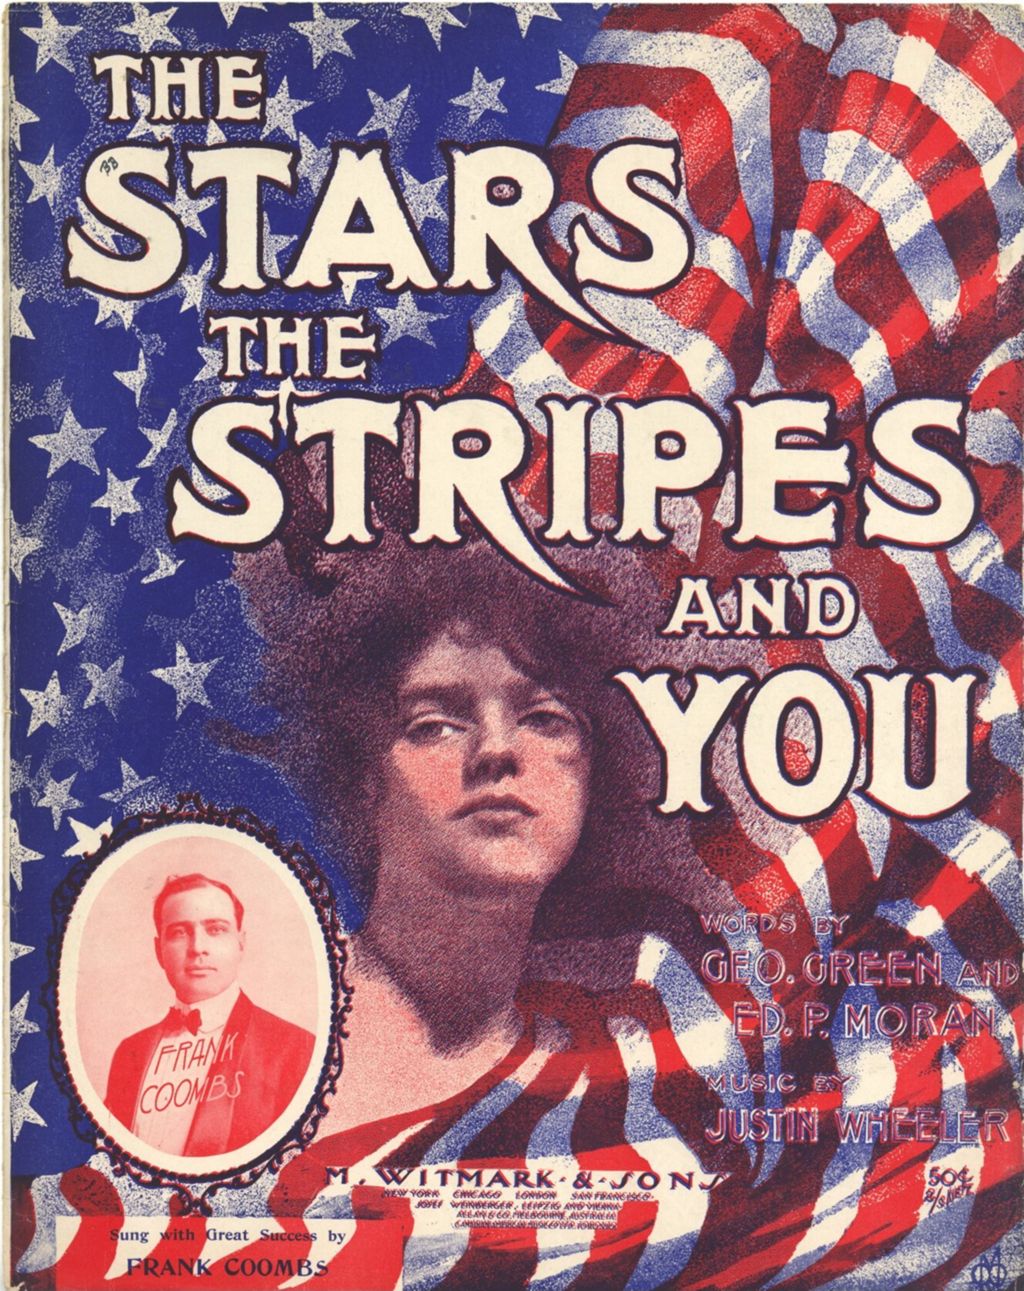 Miniature of Stars, the Stripes and You